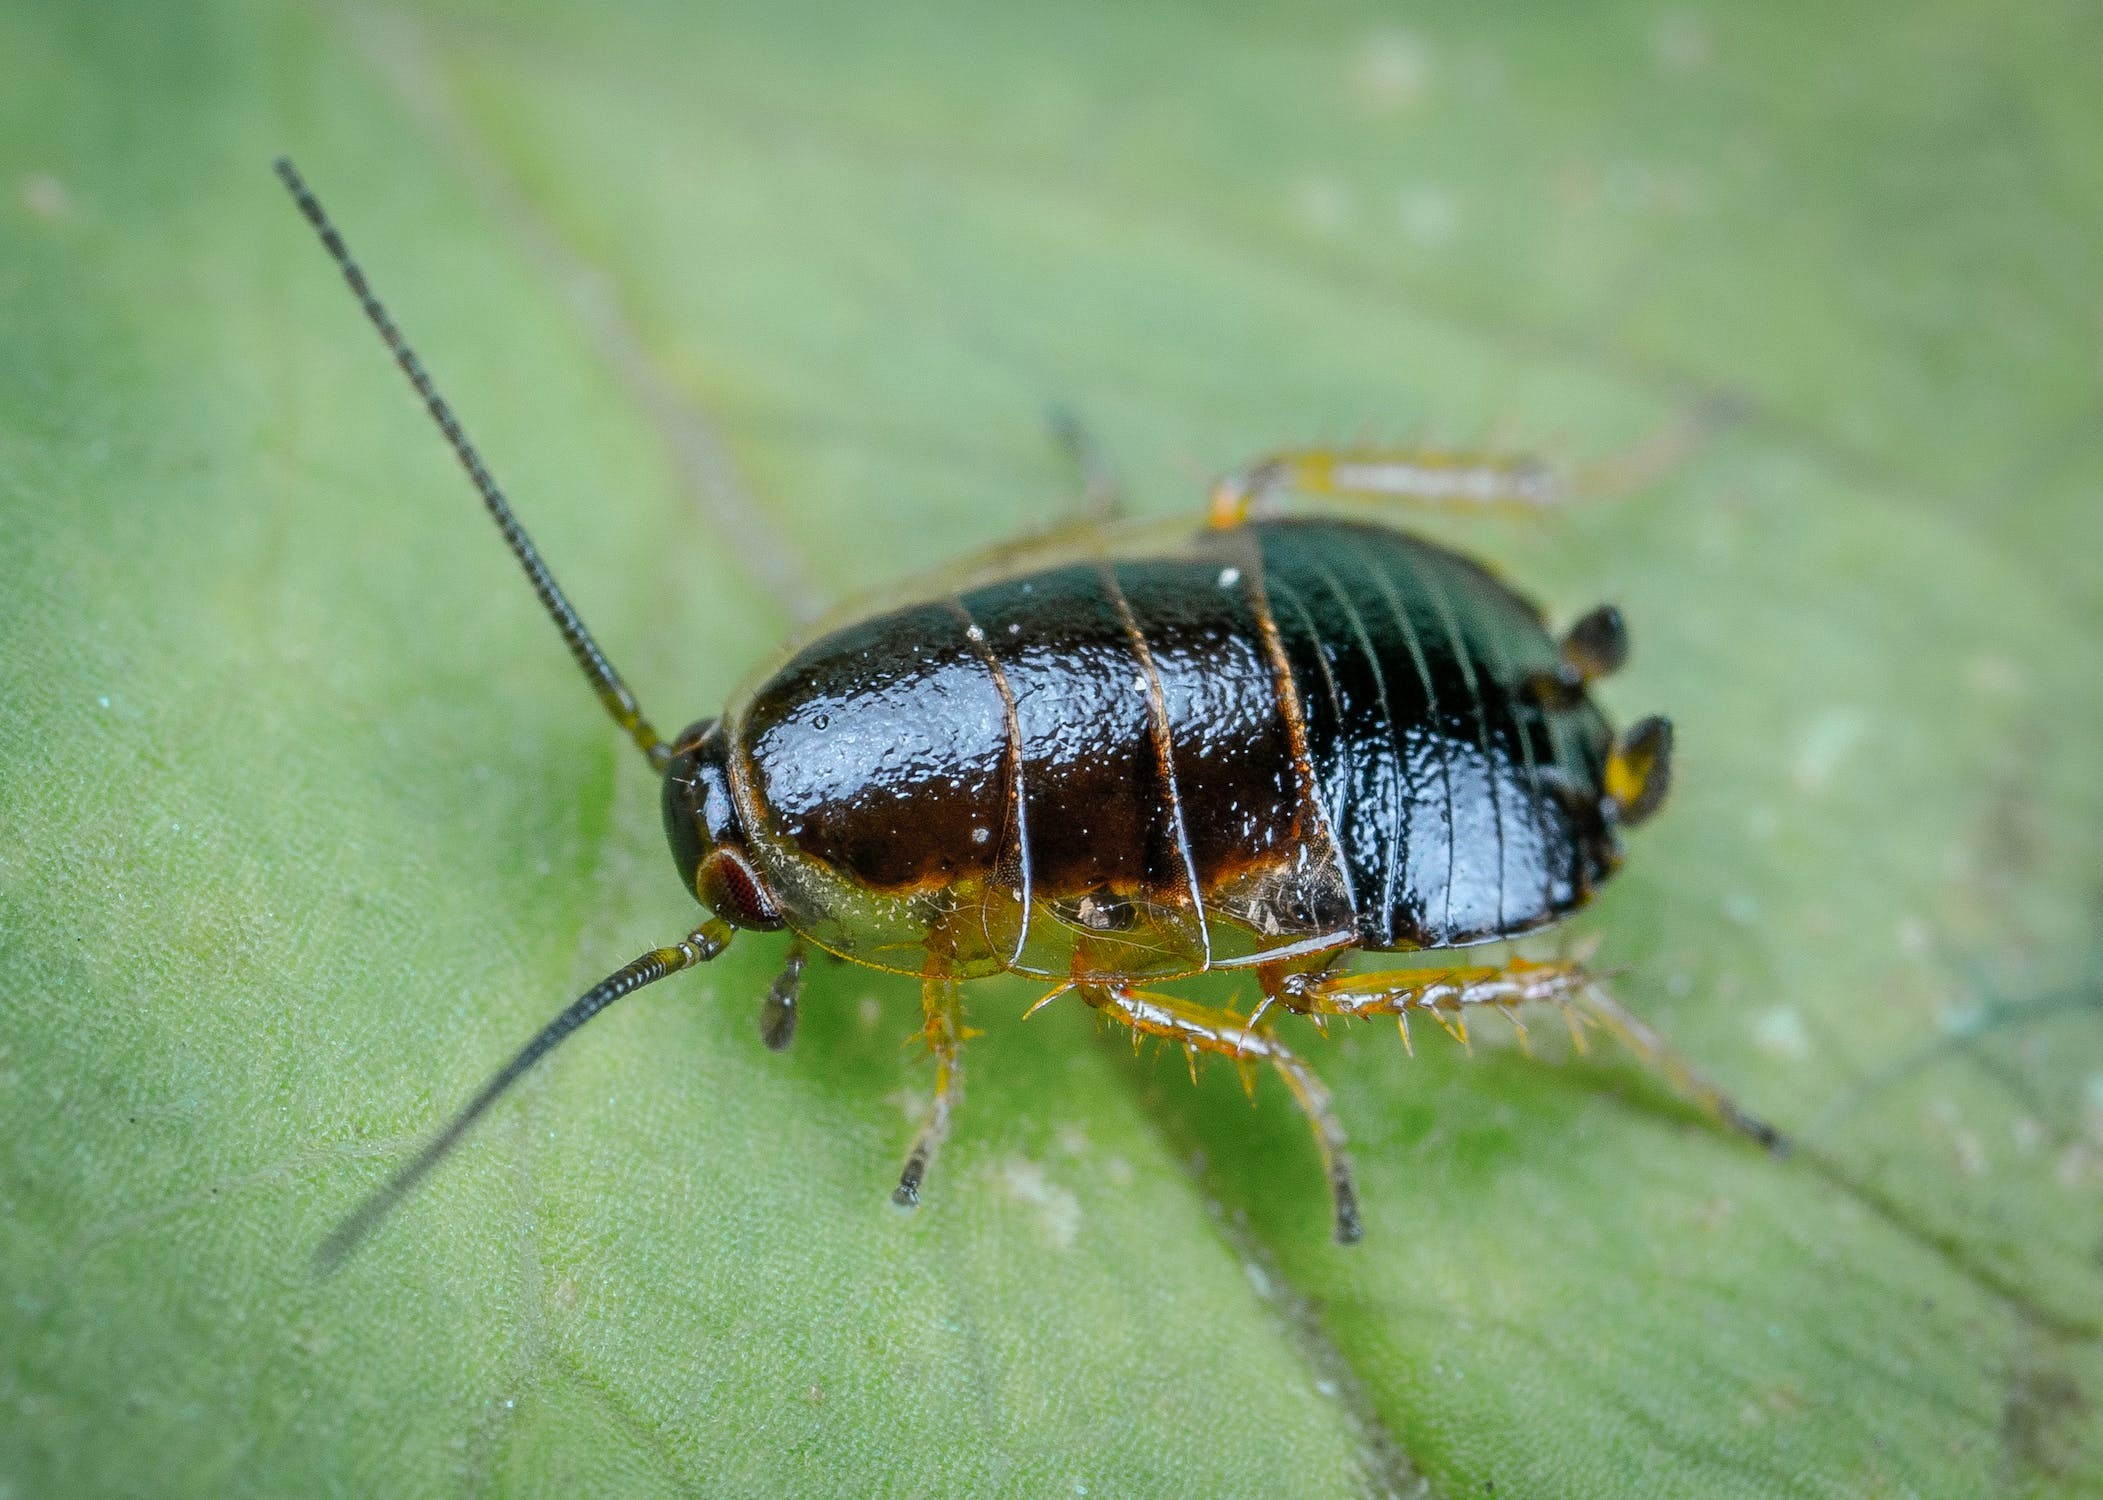 A close up image of a cockroach on a leaf